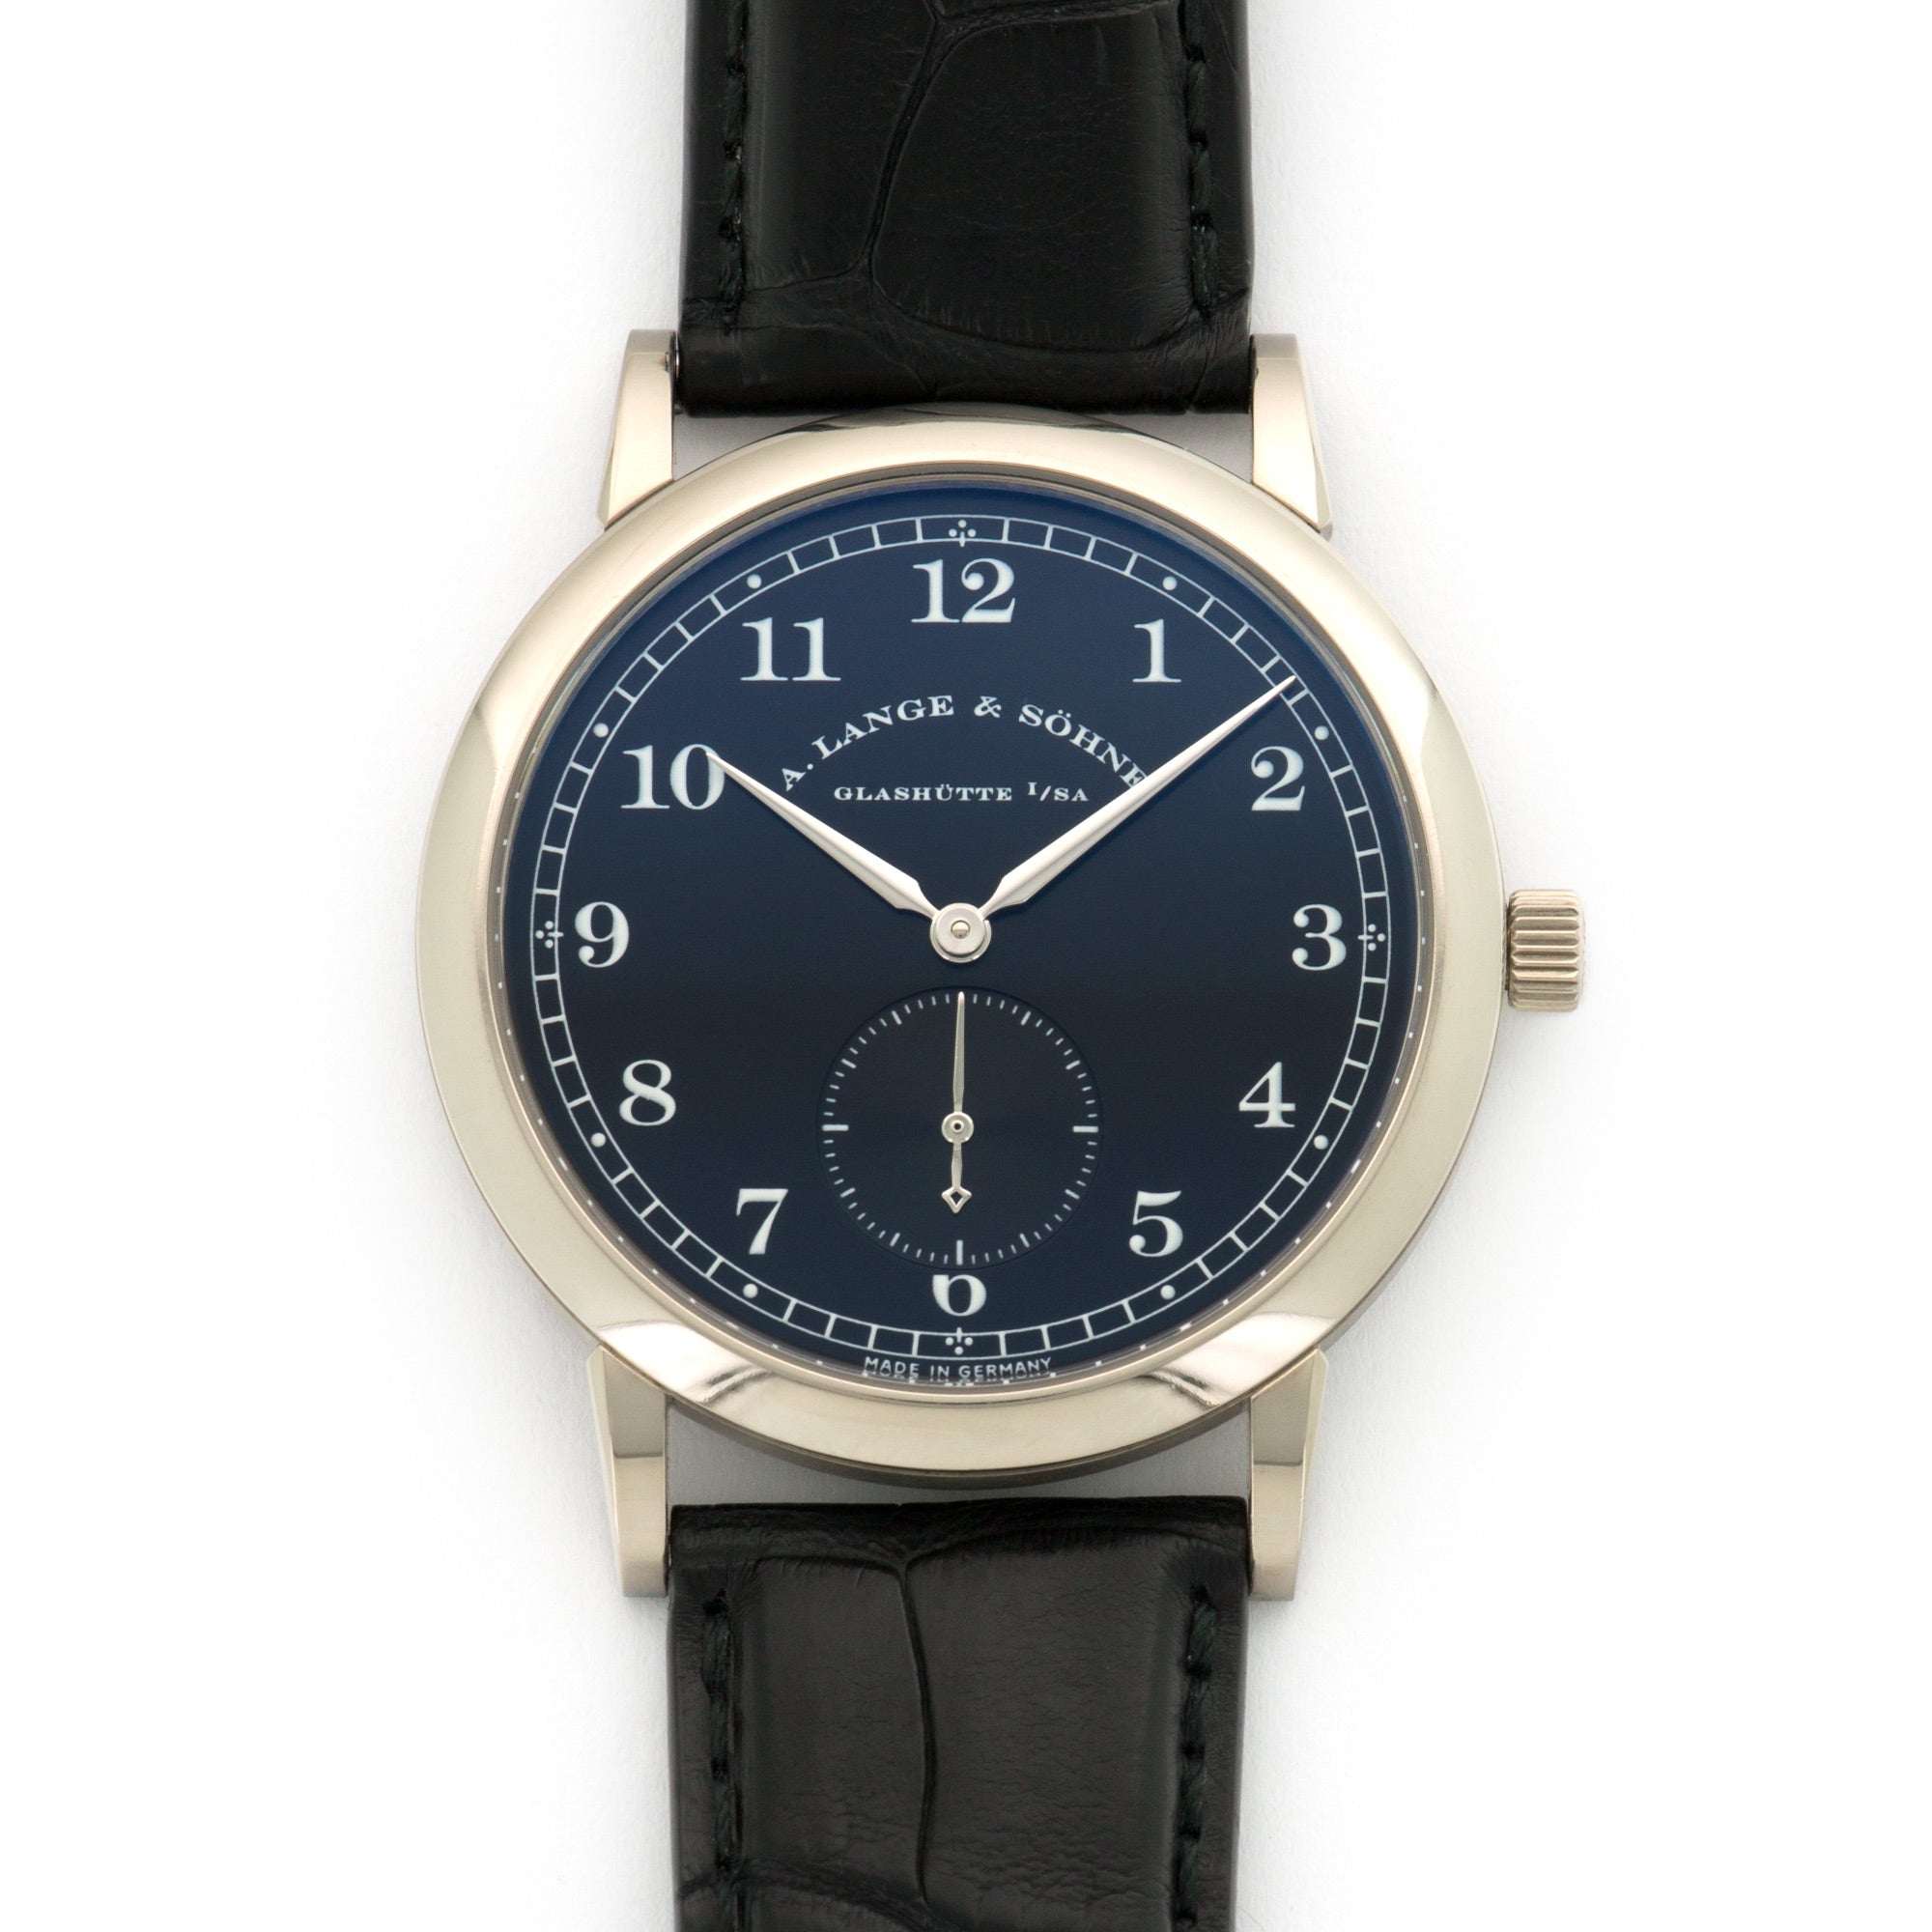 A. Lange & Sohne - A. Lange & Sohne White Gold 1815 Watch Ref. 206.029 - The Keystone Watches